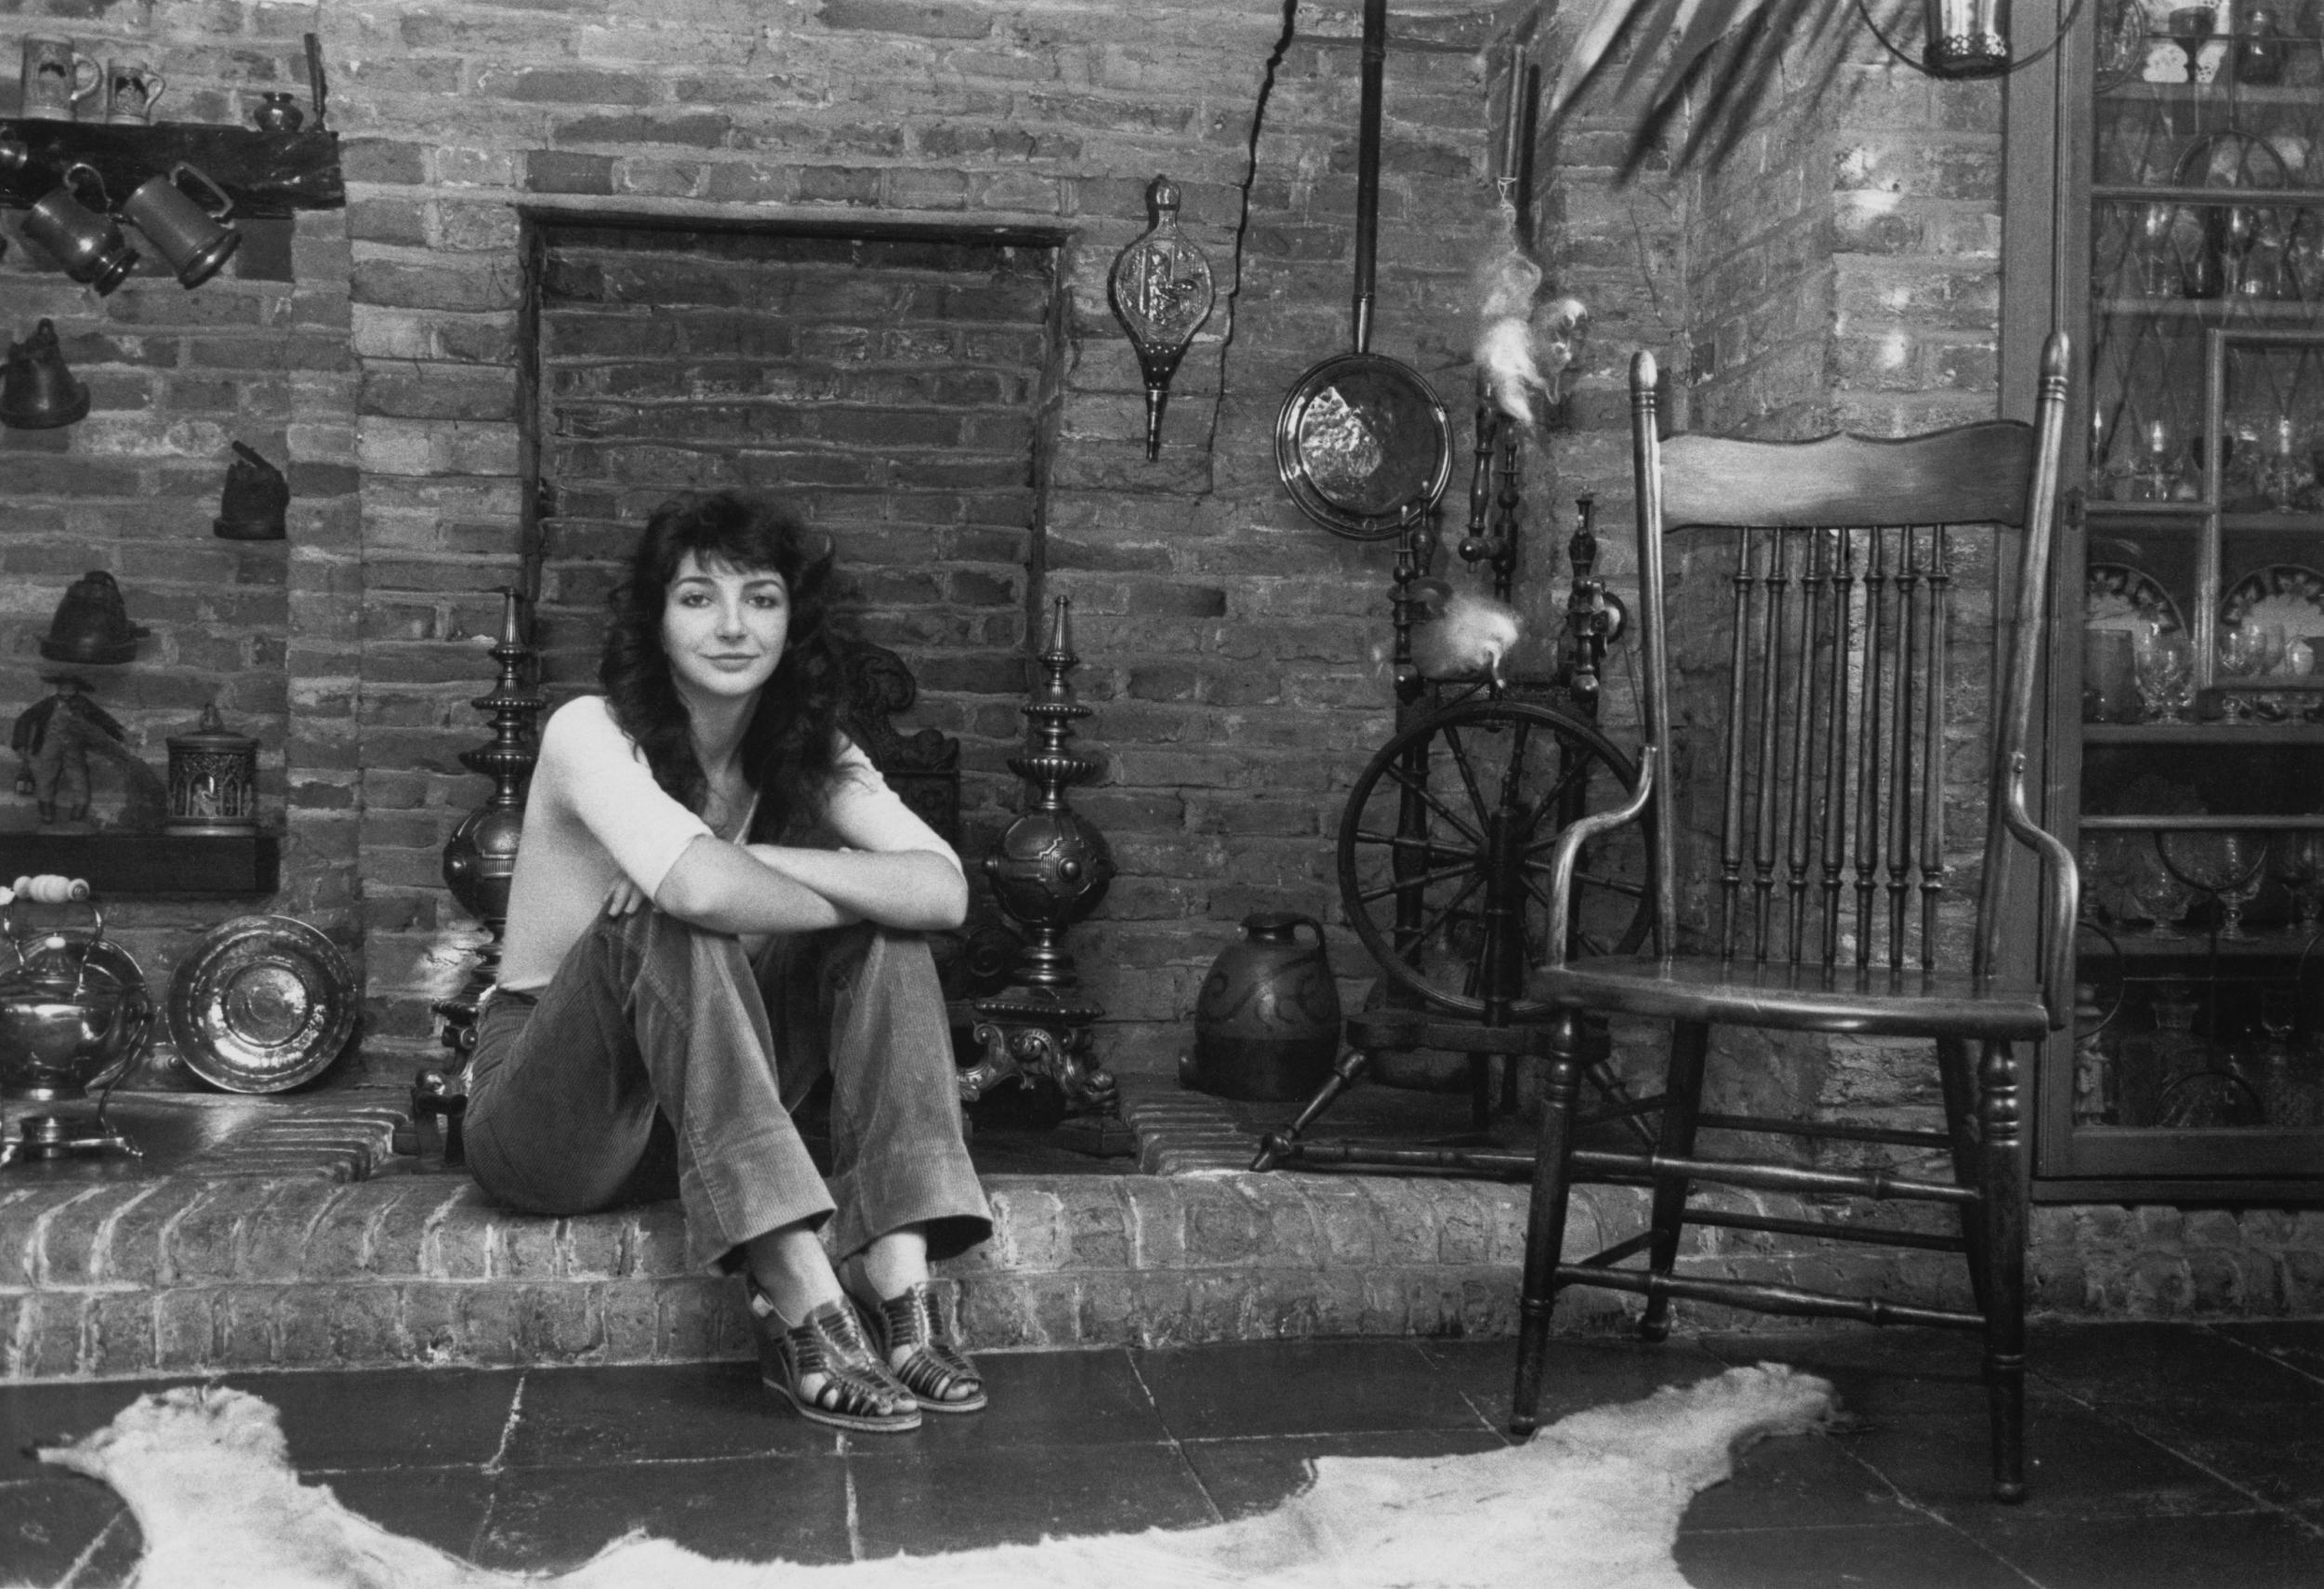 Kate Bush poses in her home in September 1978, the year her hit song 'Wuthering Heights' was released